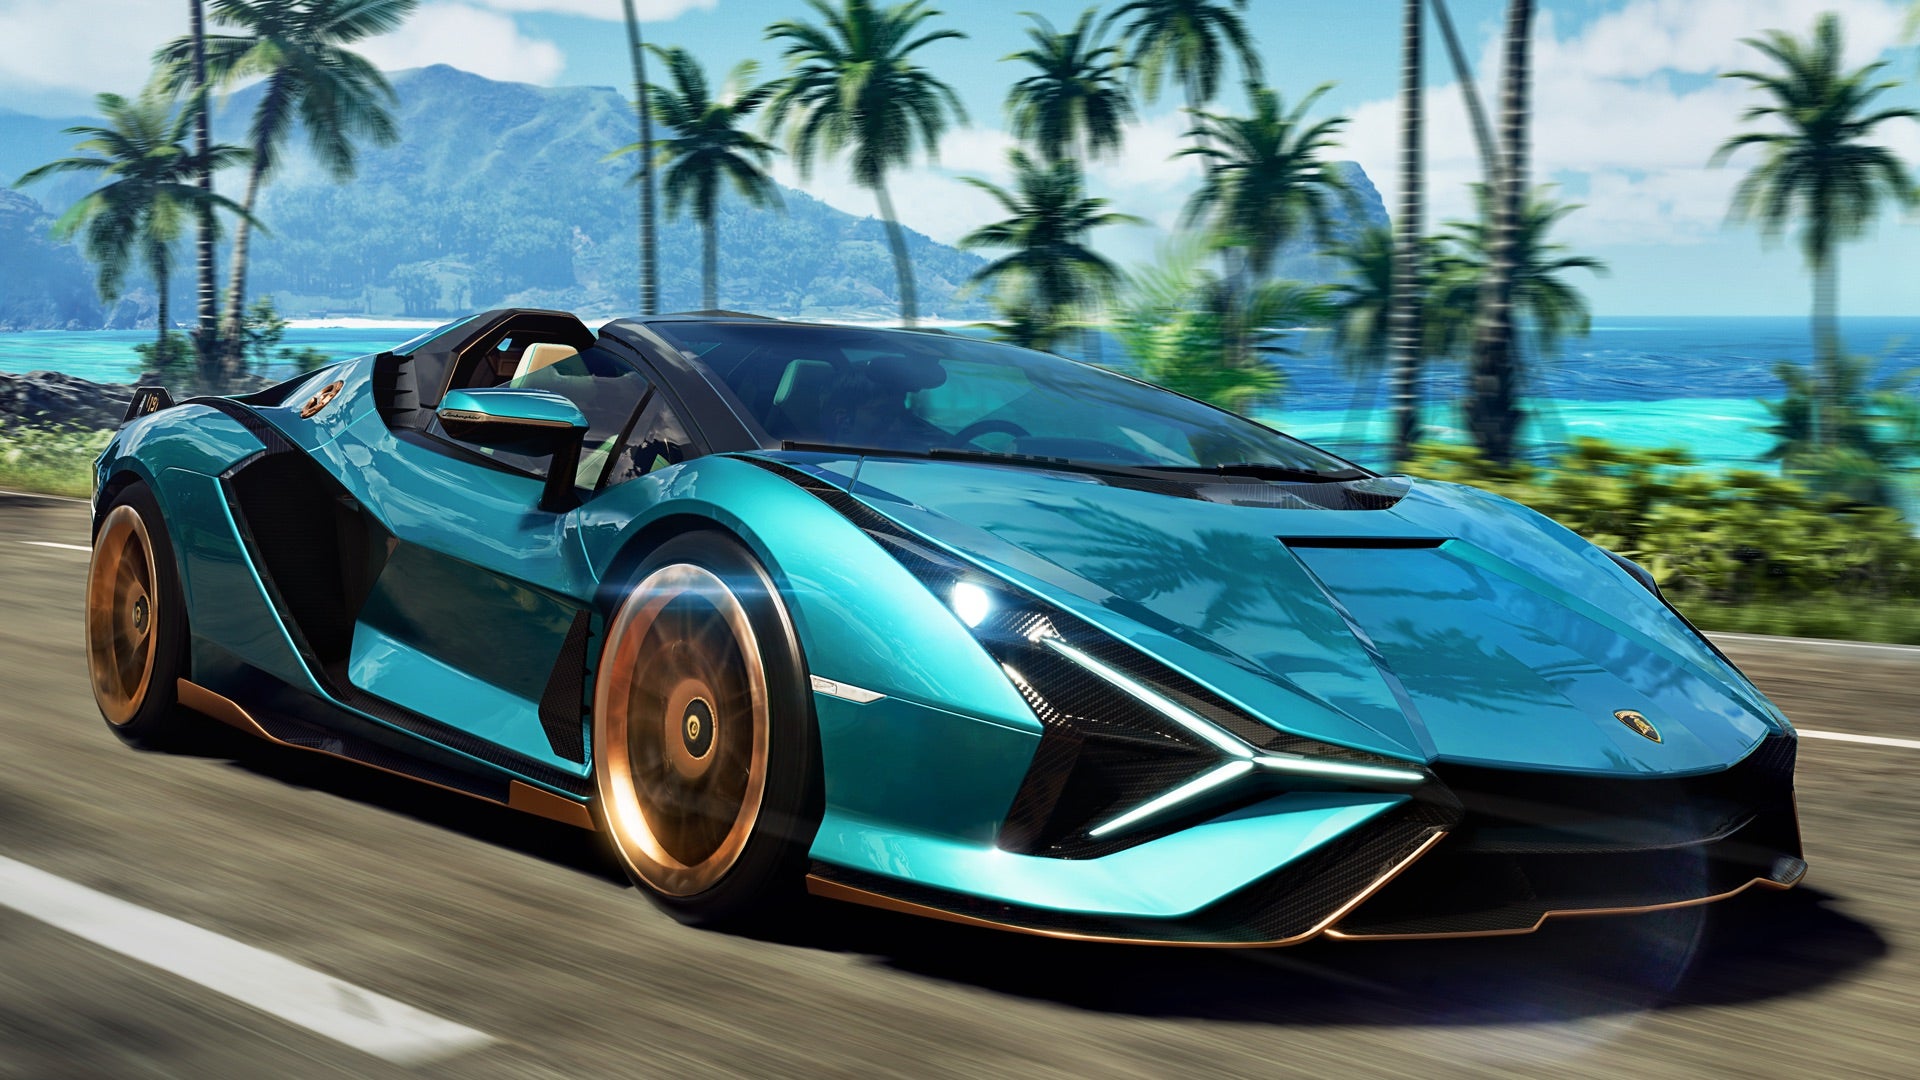 Image for The Crew Motorfest takes Ubisoft's open-world racer to Hawaii this year